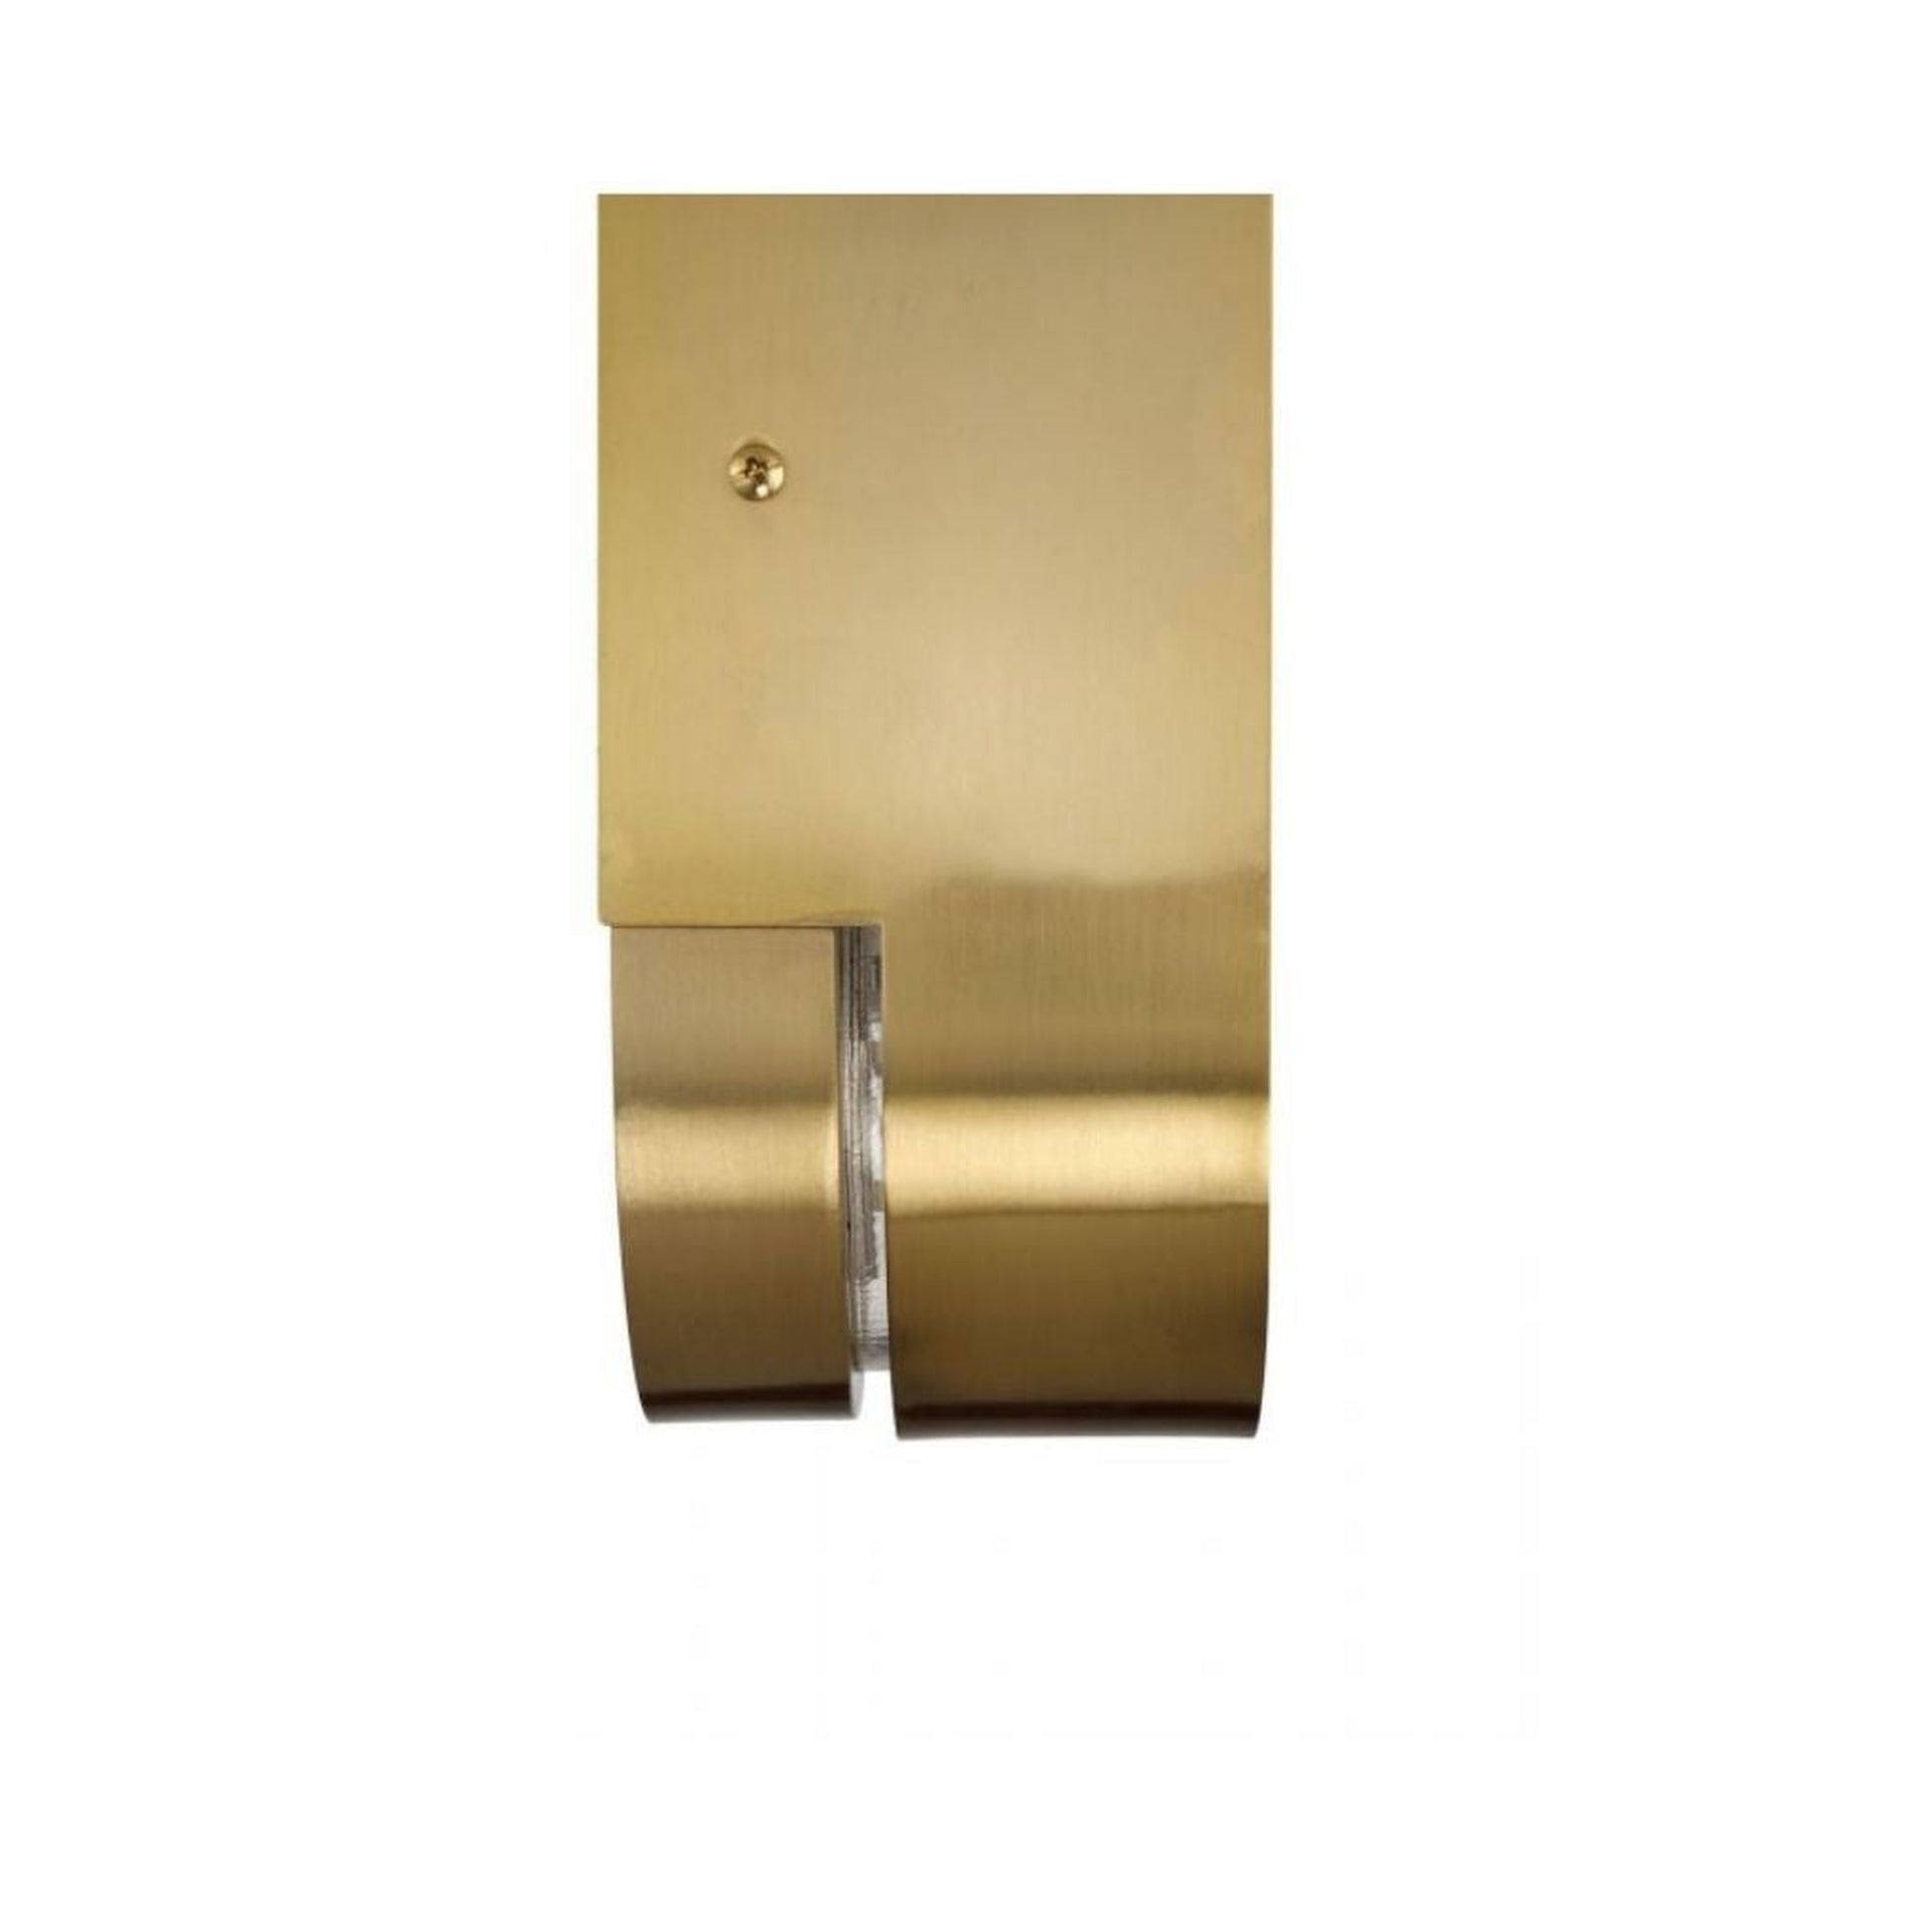 Craftmade Melody 5" x 10" 1-Light Satin Brass LED Wall Sconce With White Frosted Glass Shade